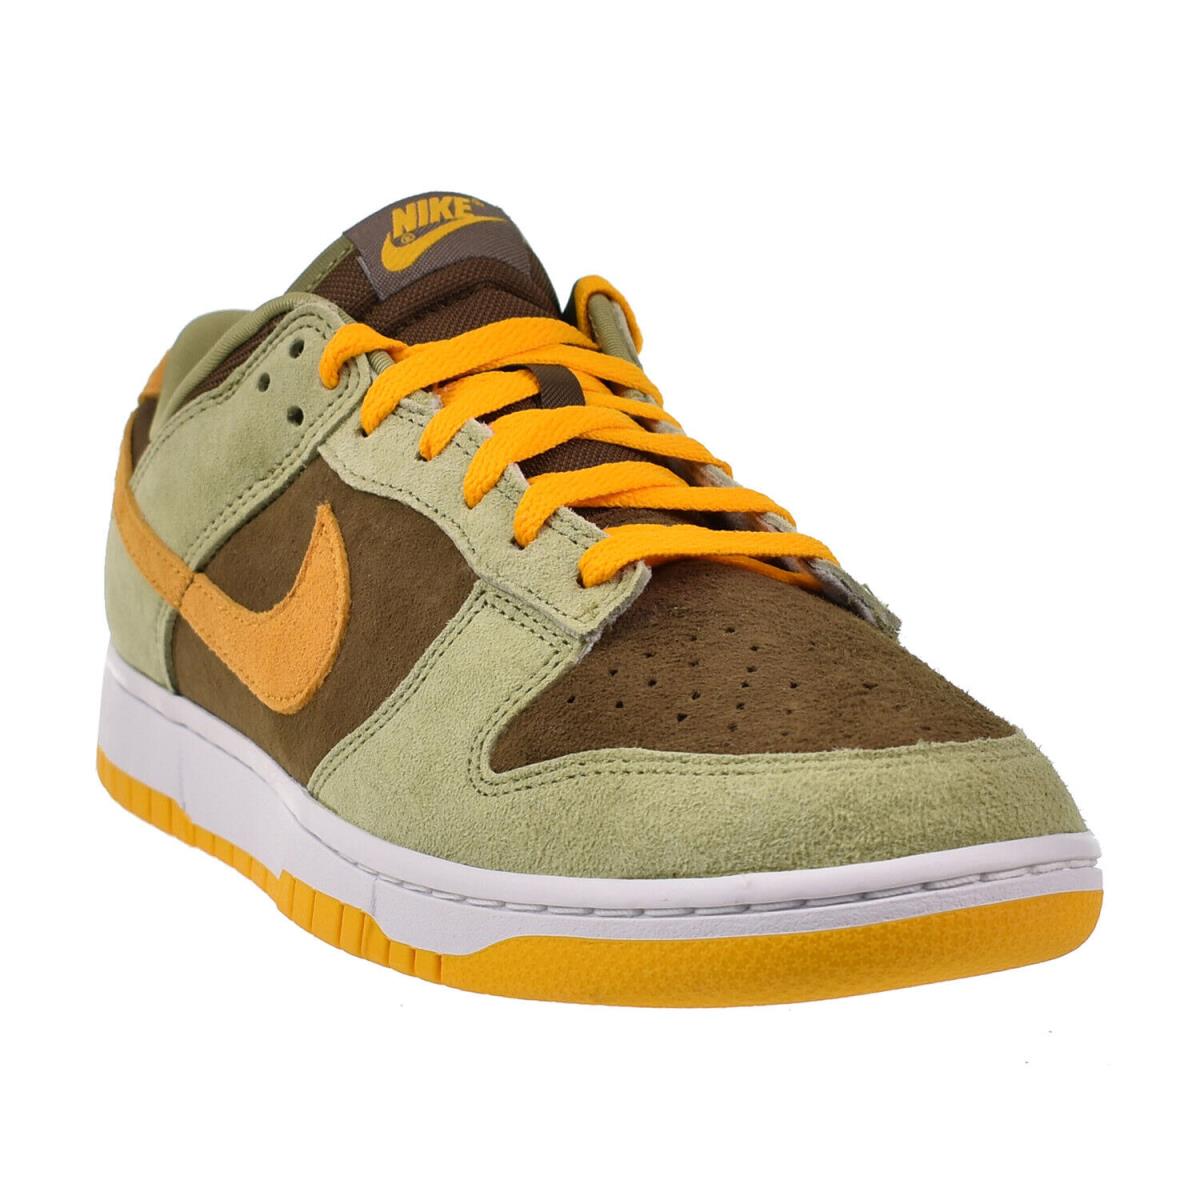 Nike Dunk Low Men`s Shoes Dusty Olive-pro Gold DH5360-300 - Dusty Olive-Pro Gold